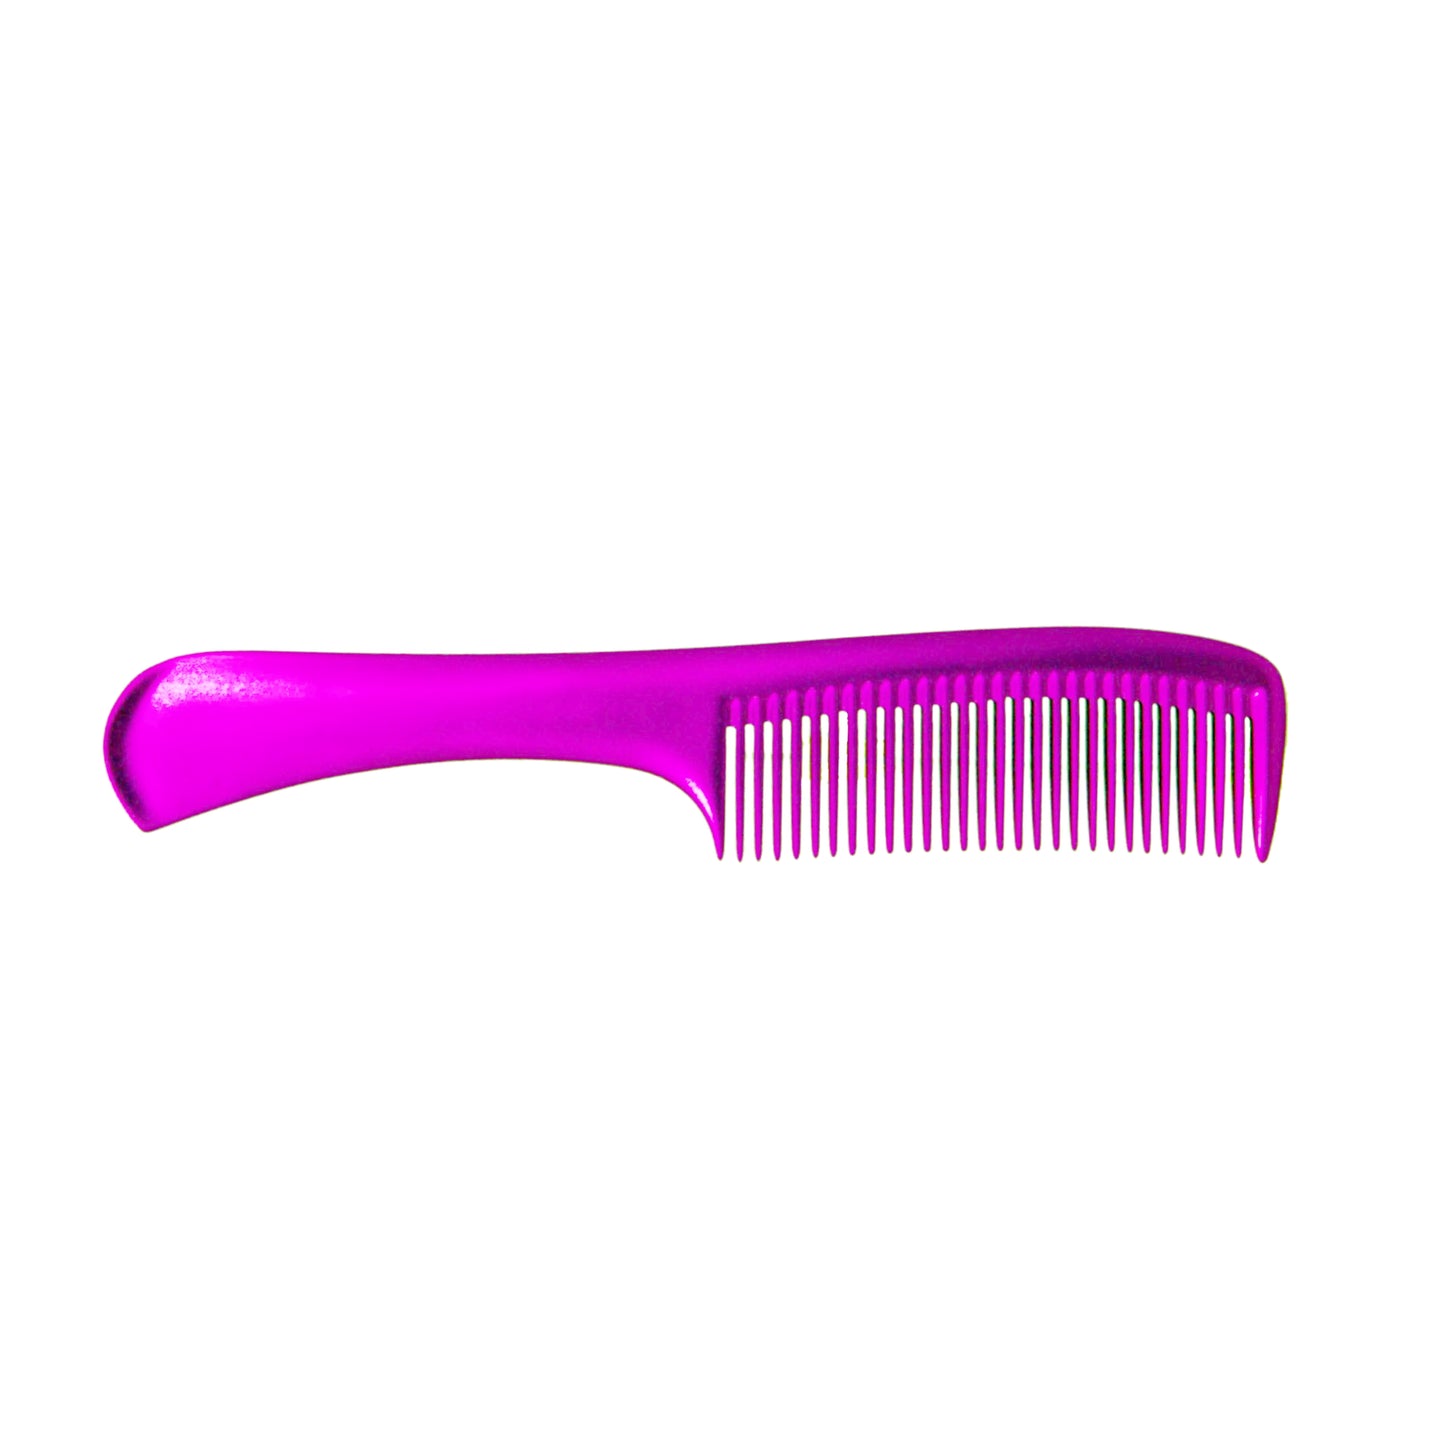 Pegasus MICOLOR 501, 9in Hard Rubber Handle Comb, Handmade, Seamless, Smooth Edges, Anti Static, Heat and Chemically Resistant, Wet Hair, Everyday Grooming Comb | Peines de goma dura - Pink